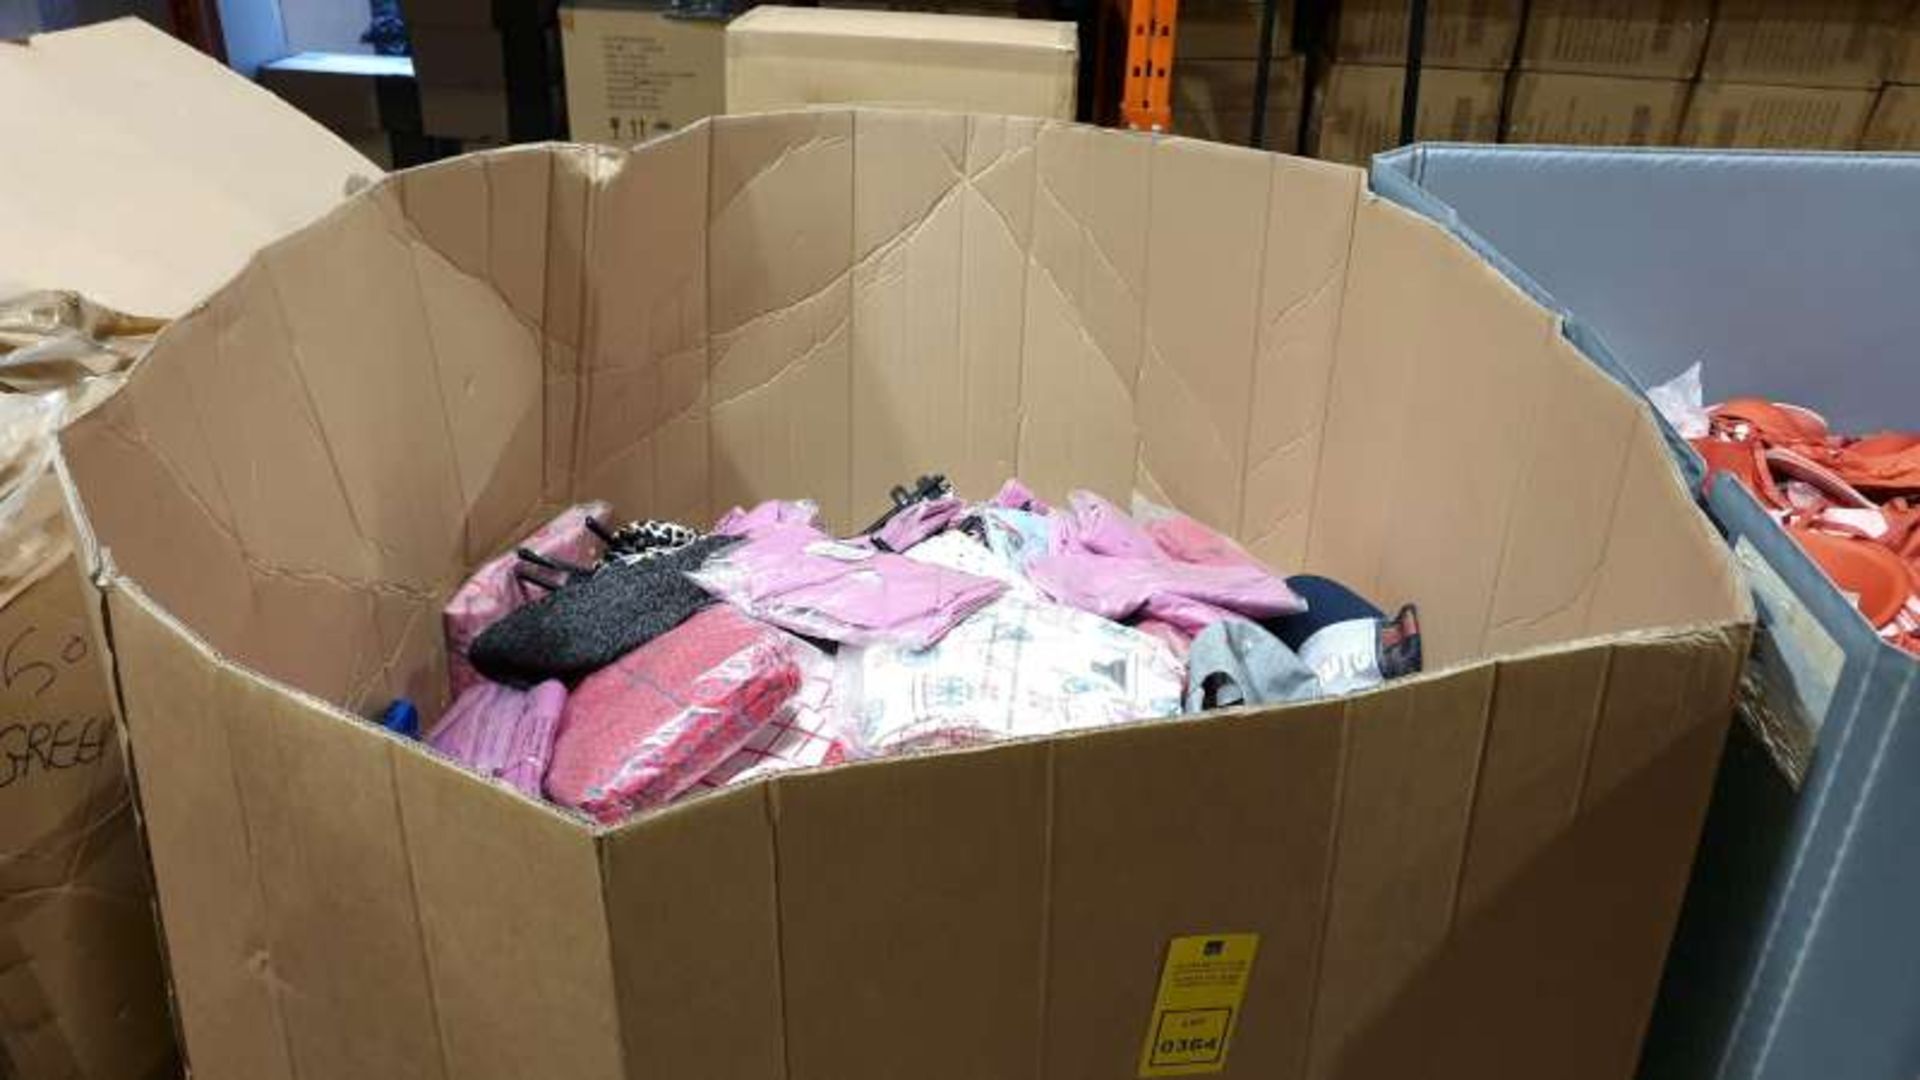 BOX PALLET OF A LARGE QUANTITY OF CLOTHING IN VARIOUS STYLES AND SIZES